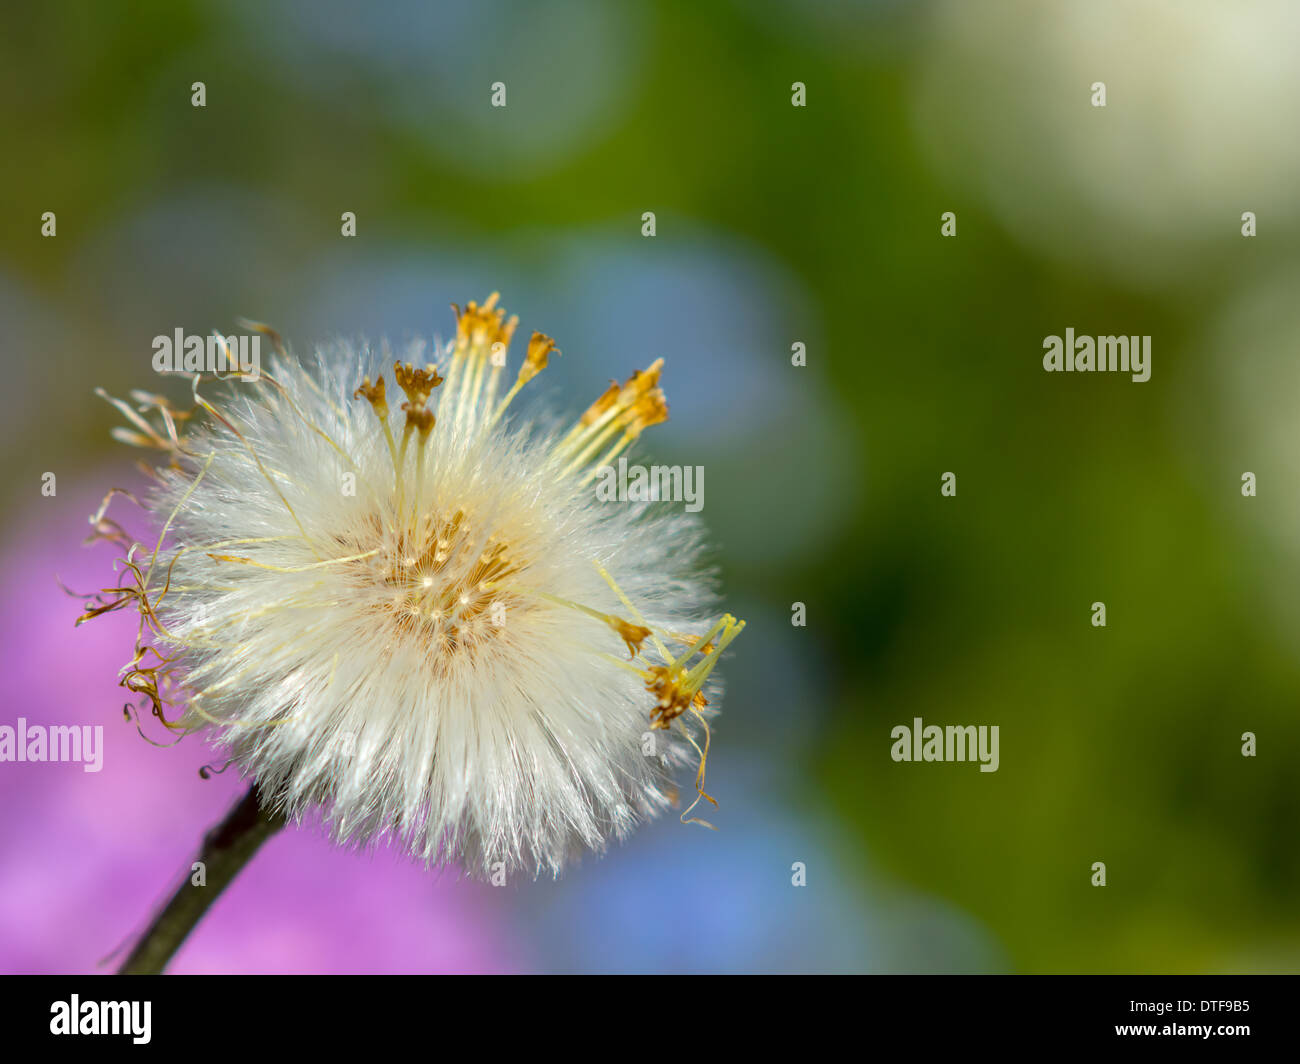 Dandelion seed On A Colorful Blurred Background Stock Photo